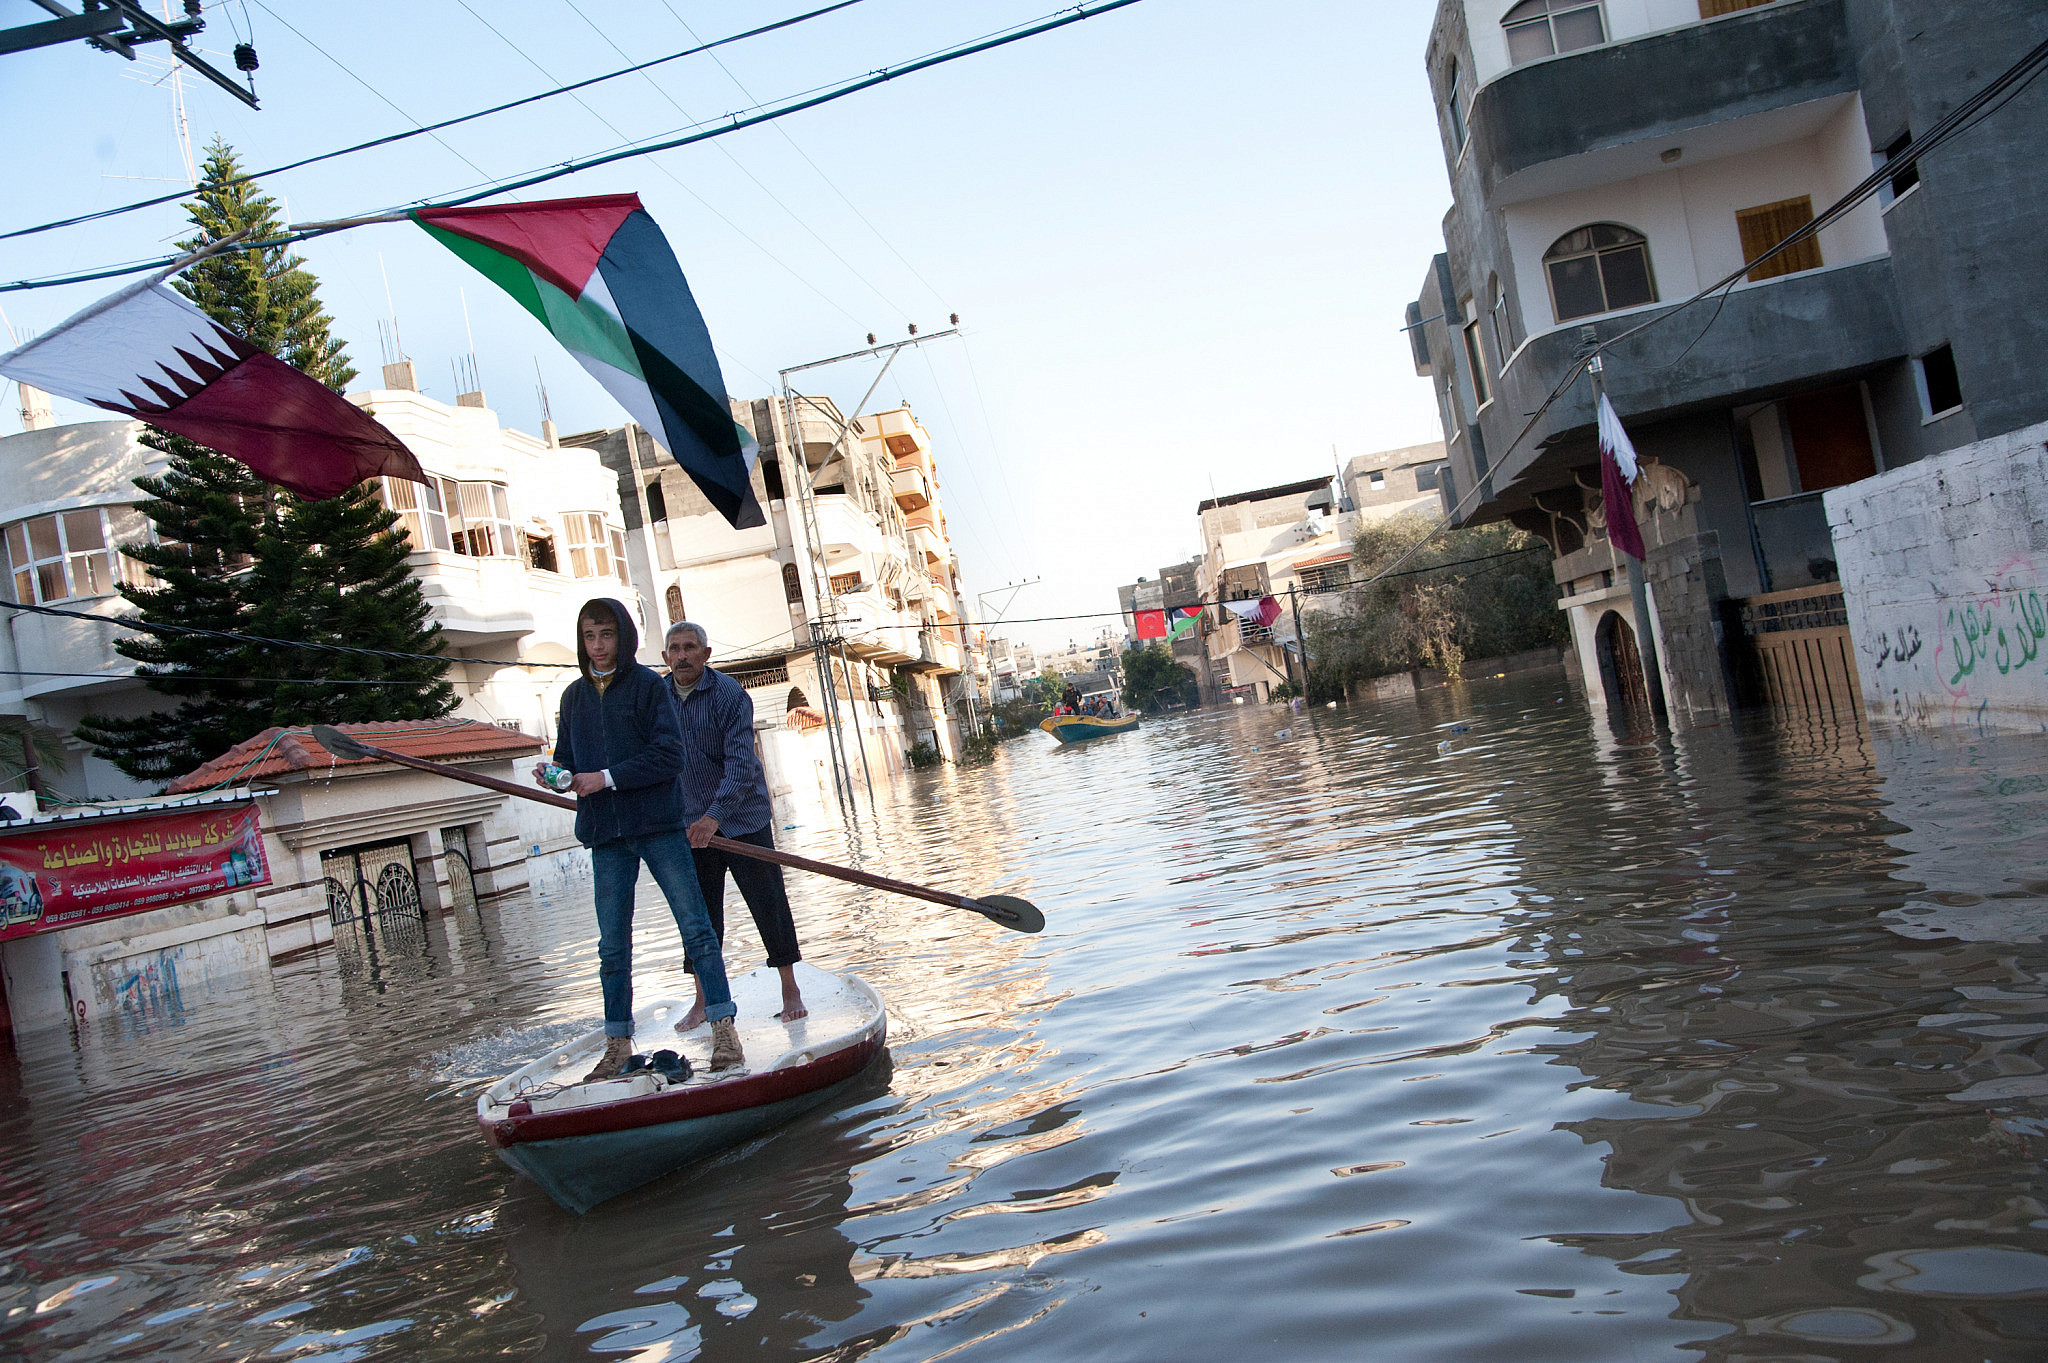 A week after torrential rain caused severe flooding, Palestinians use fishing boats to assist residents in retrieving belongings from their homes in the Al-Nafaq section of Gaza City, December 18, 2013. (Ryan Roderick Beiler/Activestills.org)